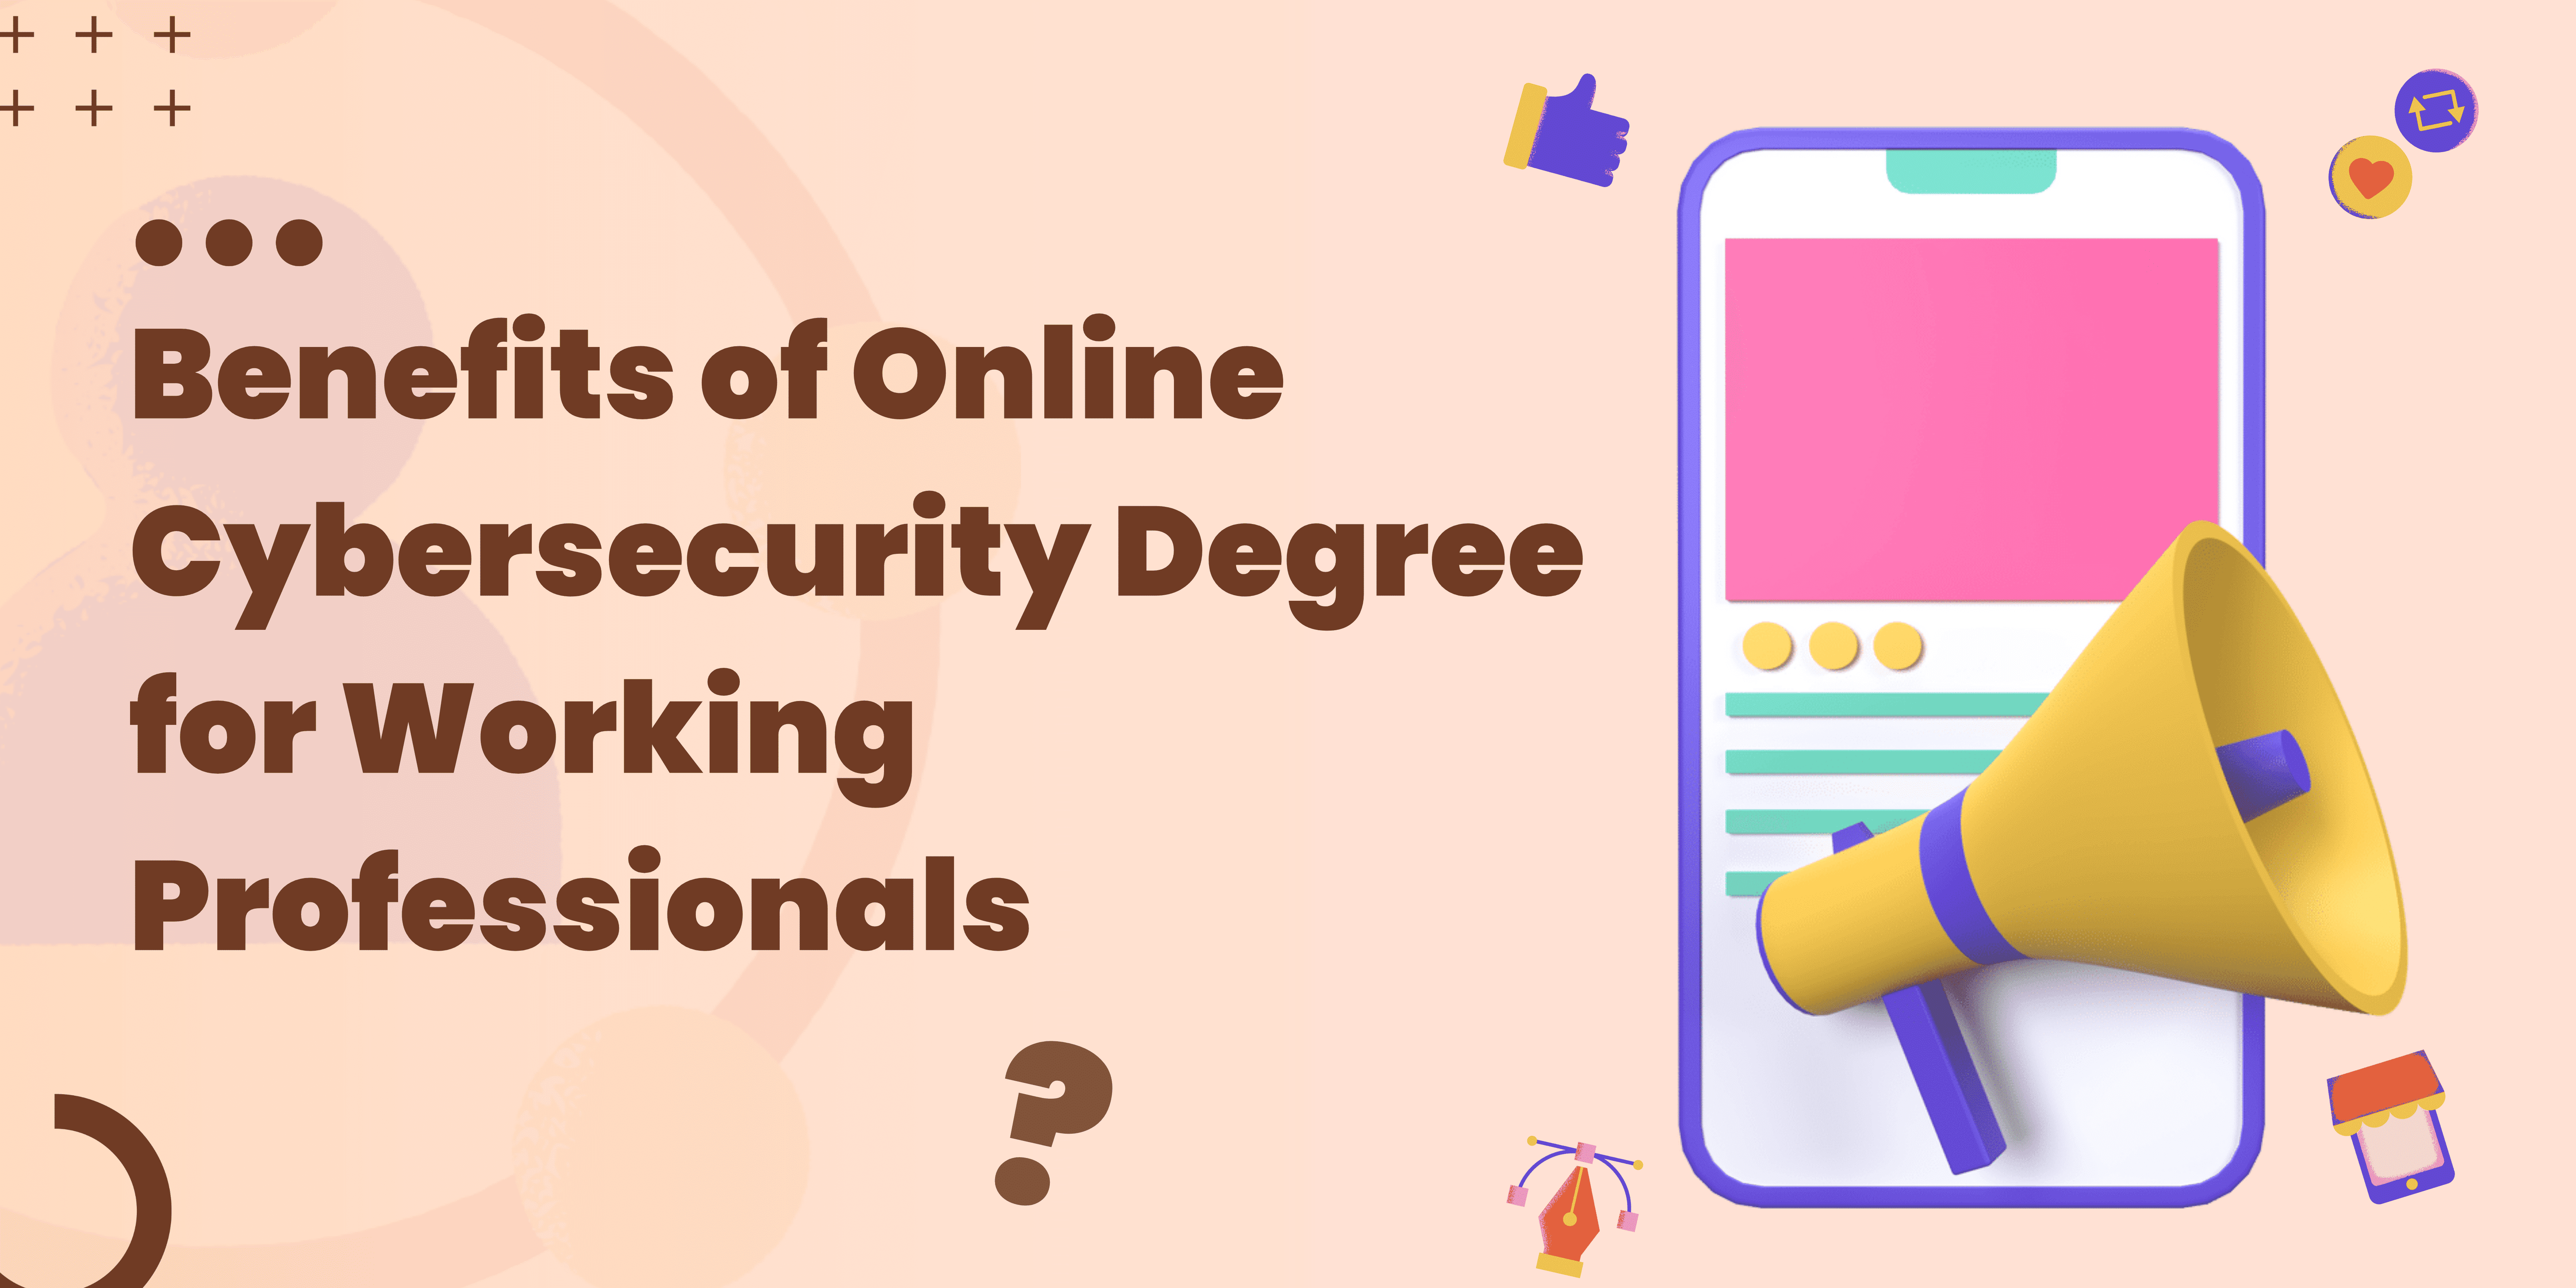 Benefits of Online Cybersecurity Degree for Working Professionals